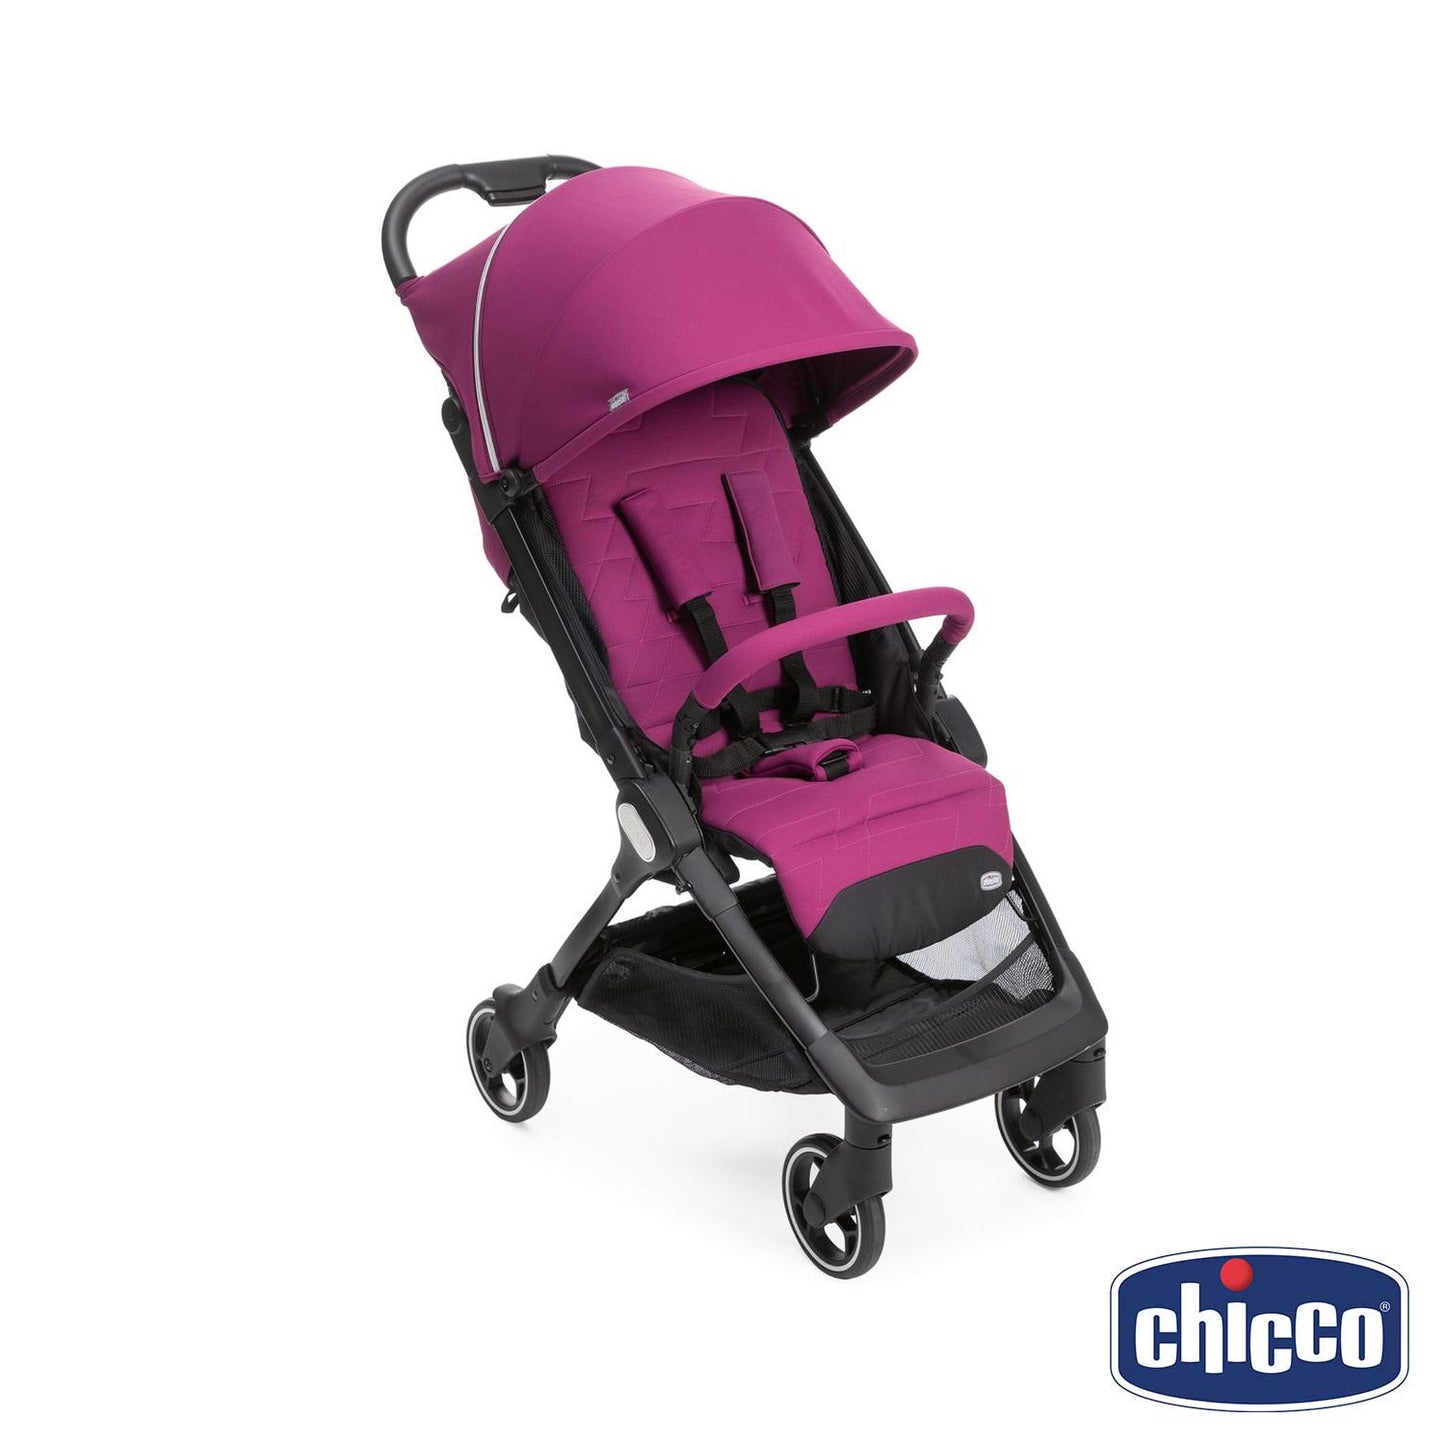 Chicco - Ultra-compact stroller We